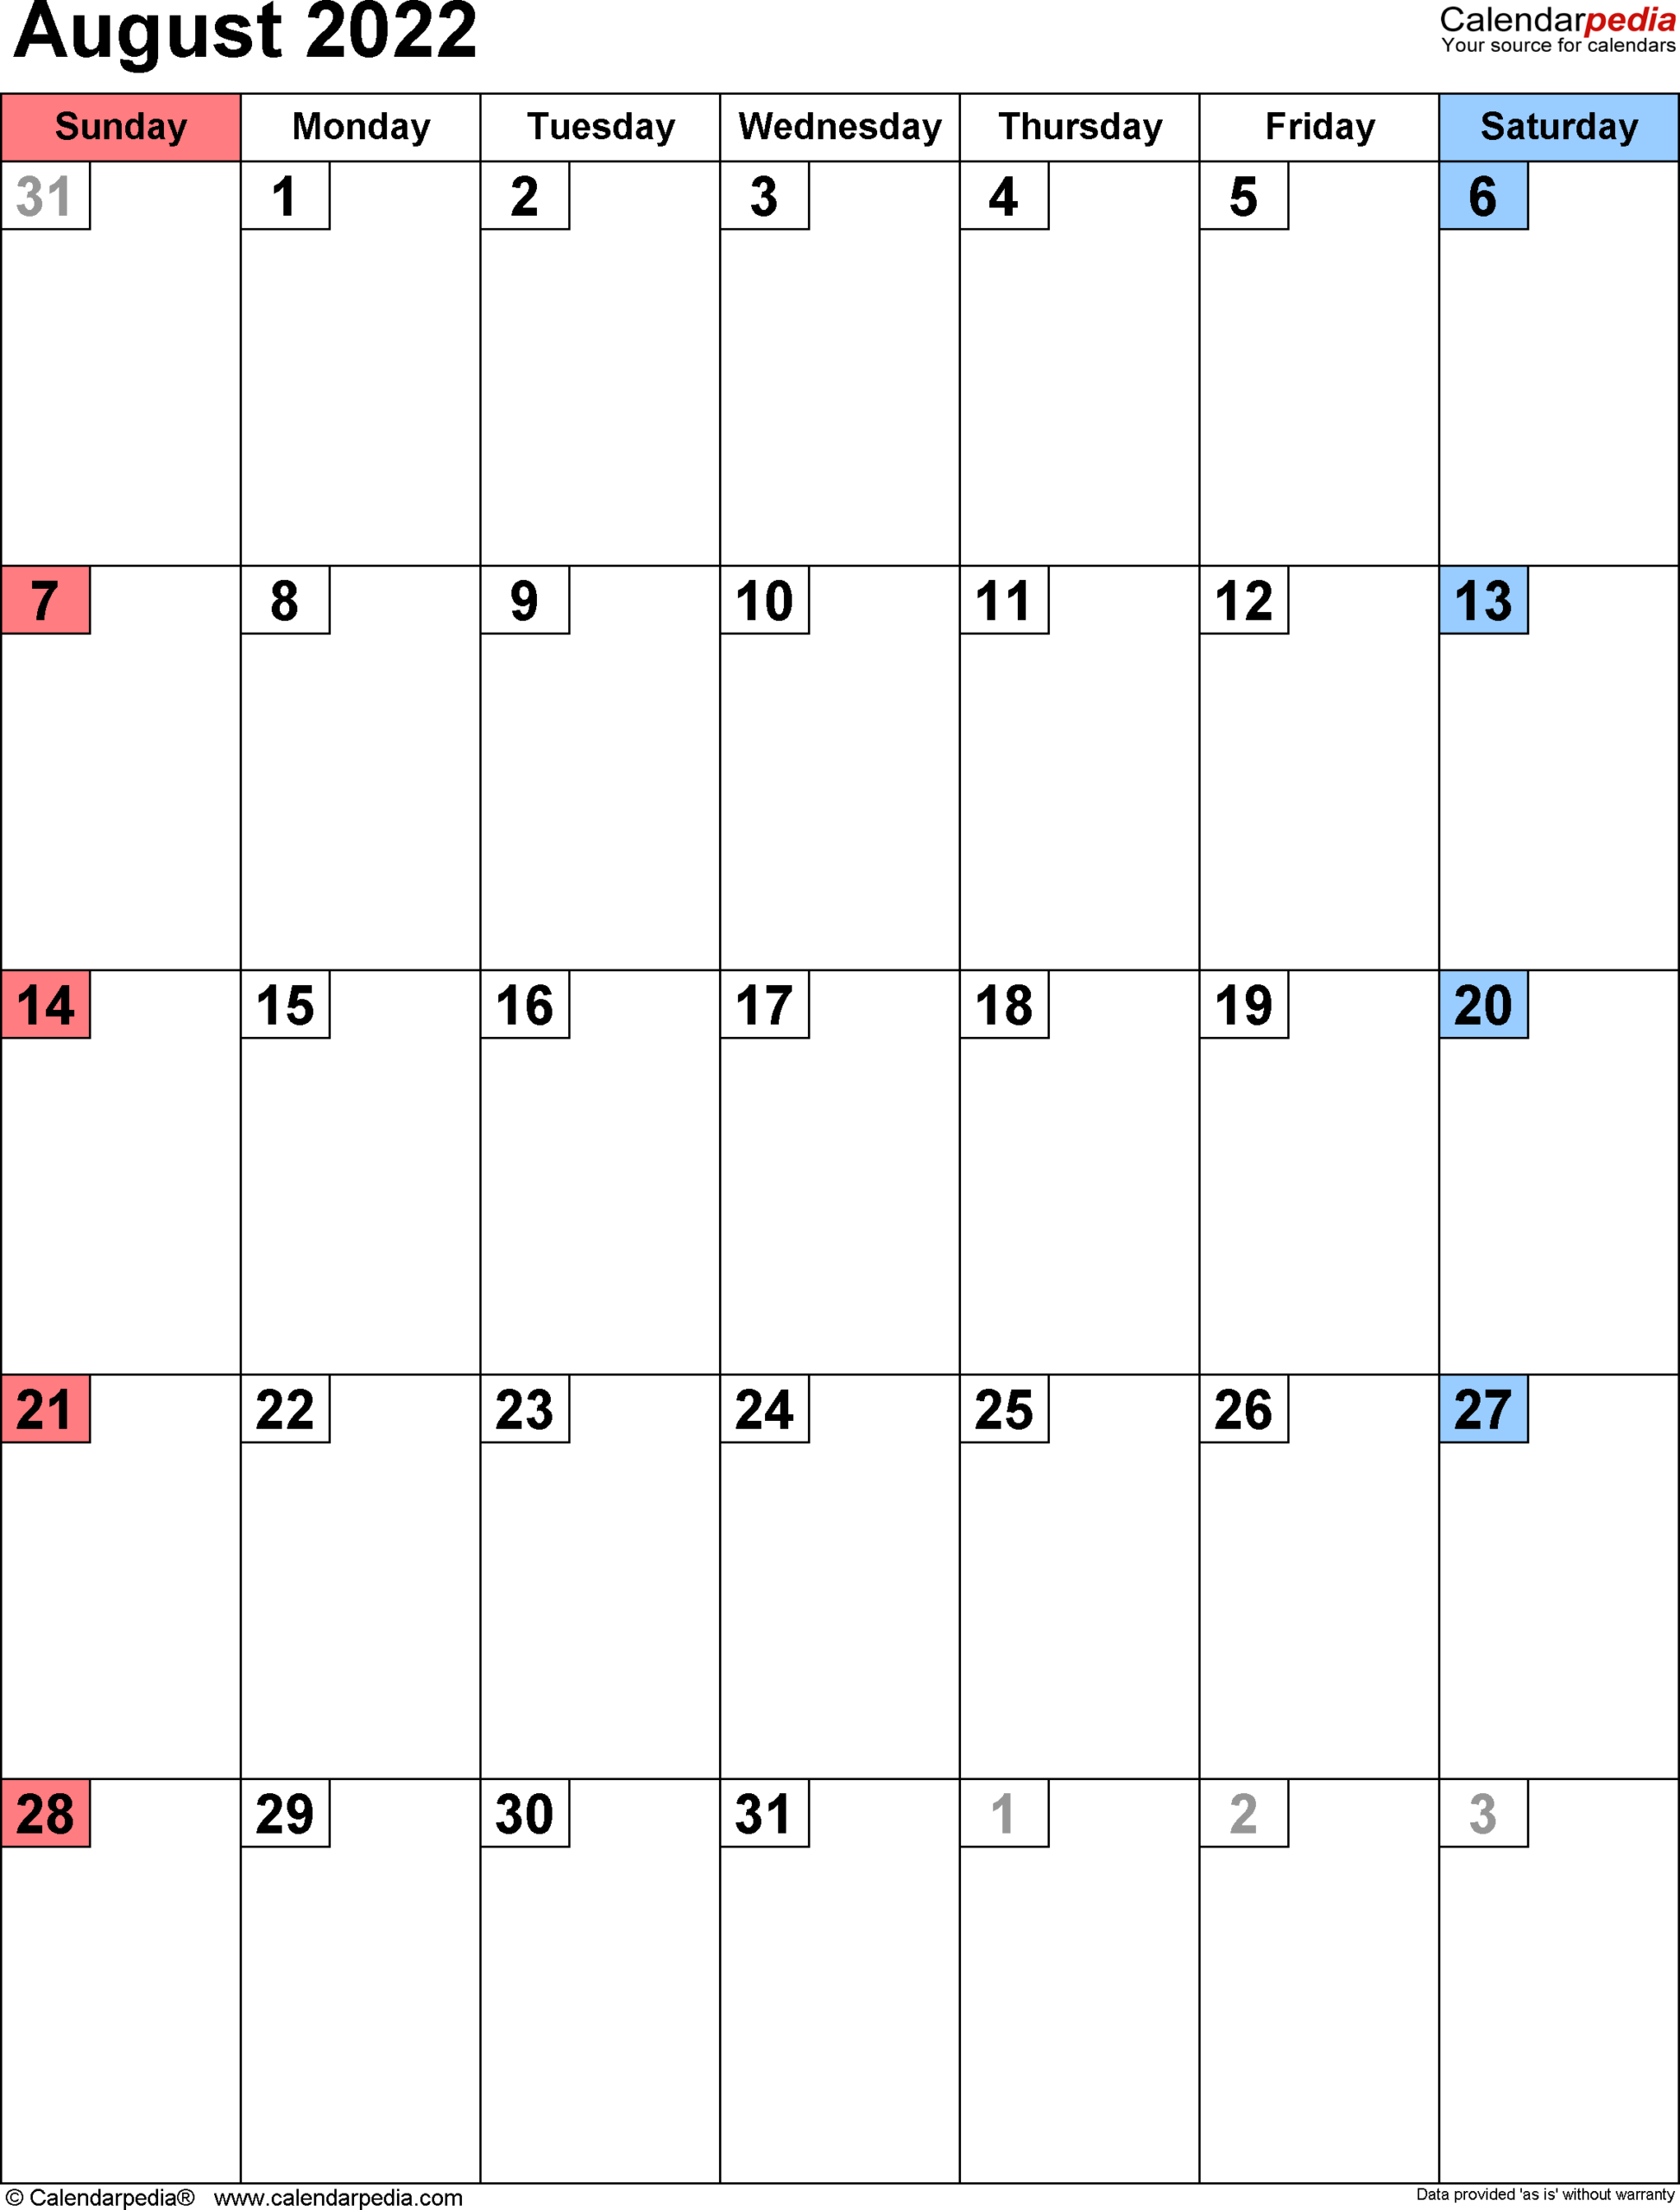 August 2022 Calendar | Templates For Word, Excel And Pdf